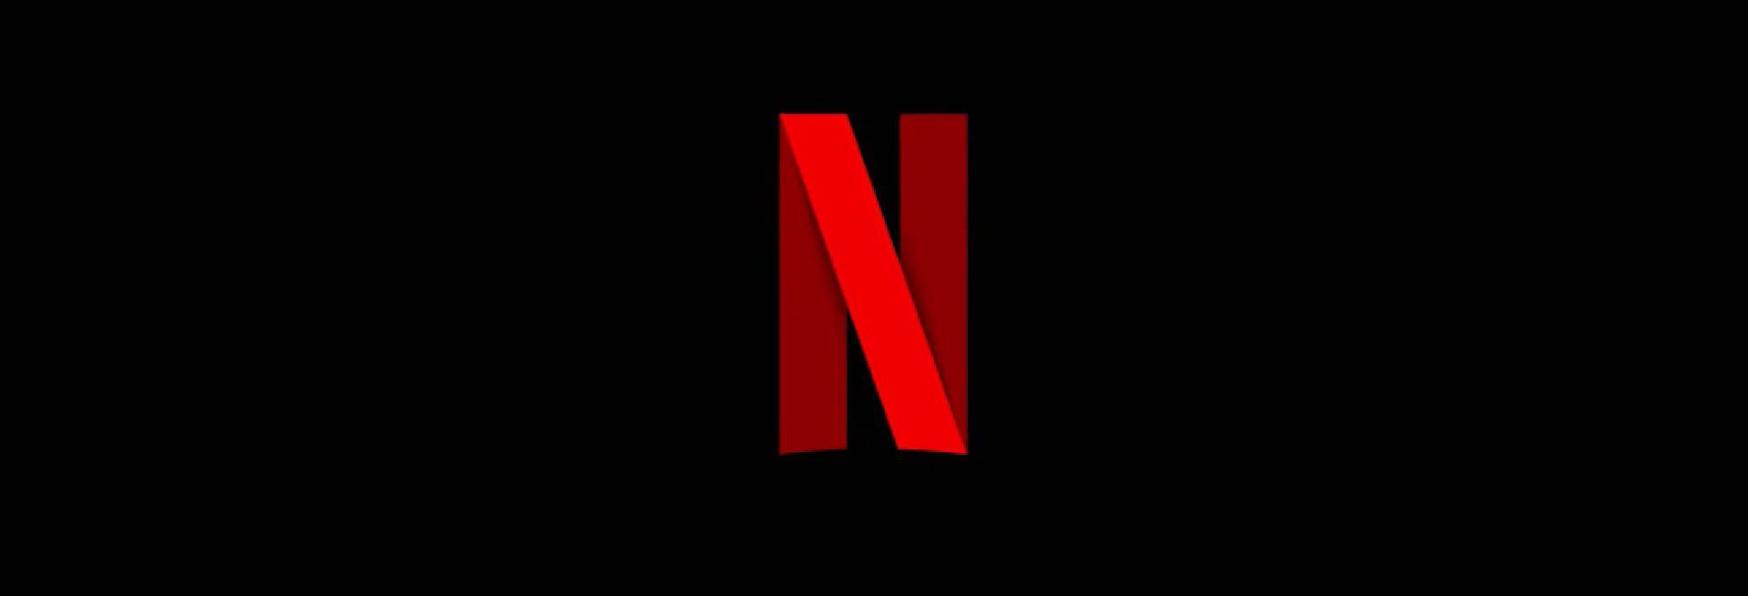 Netflix starts account sharing pressure: password sharing will have costs